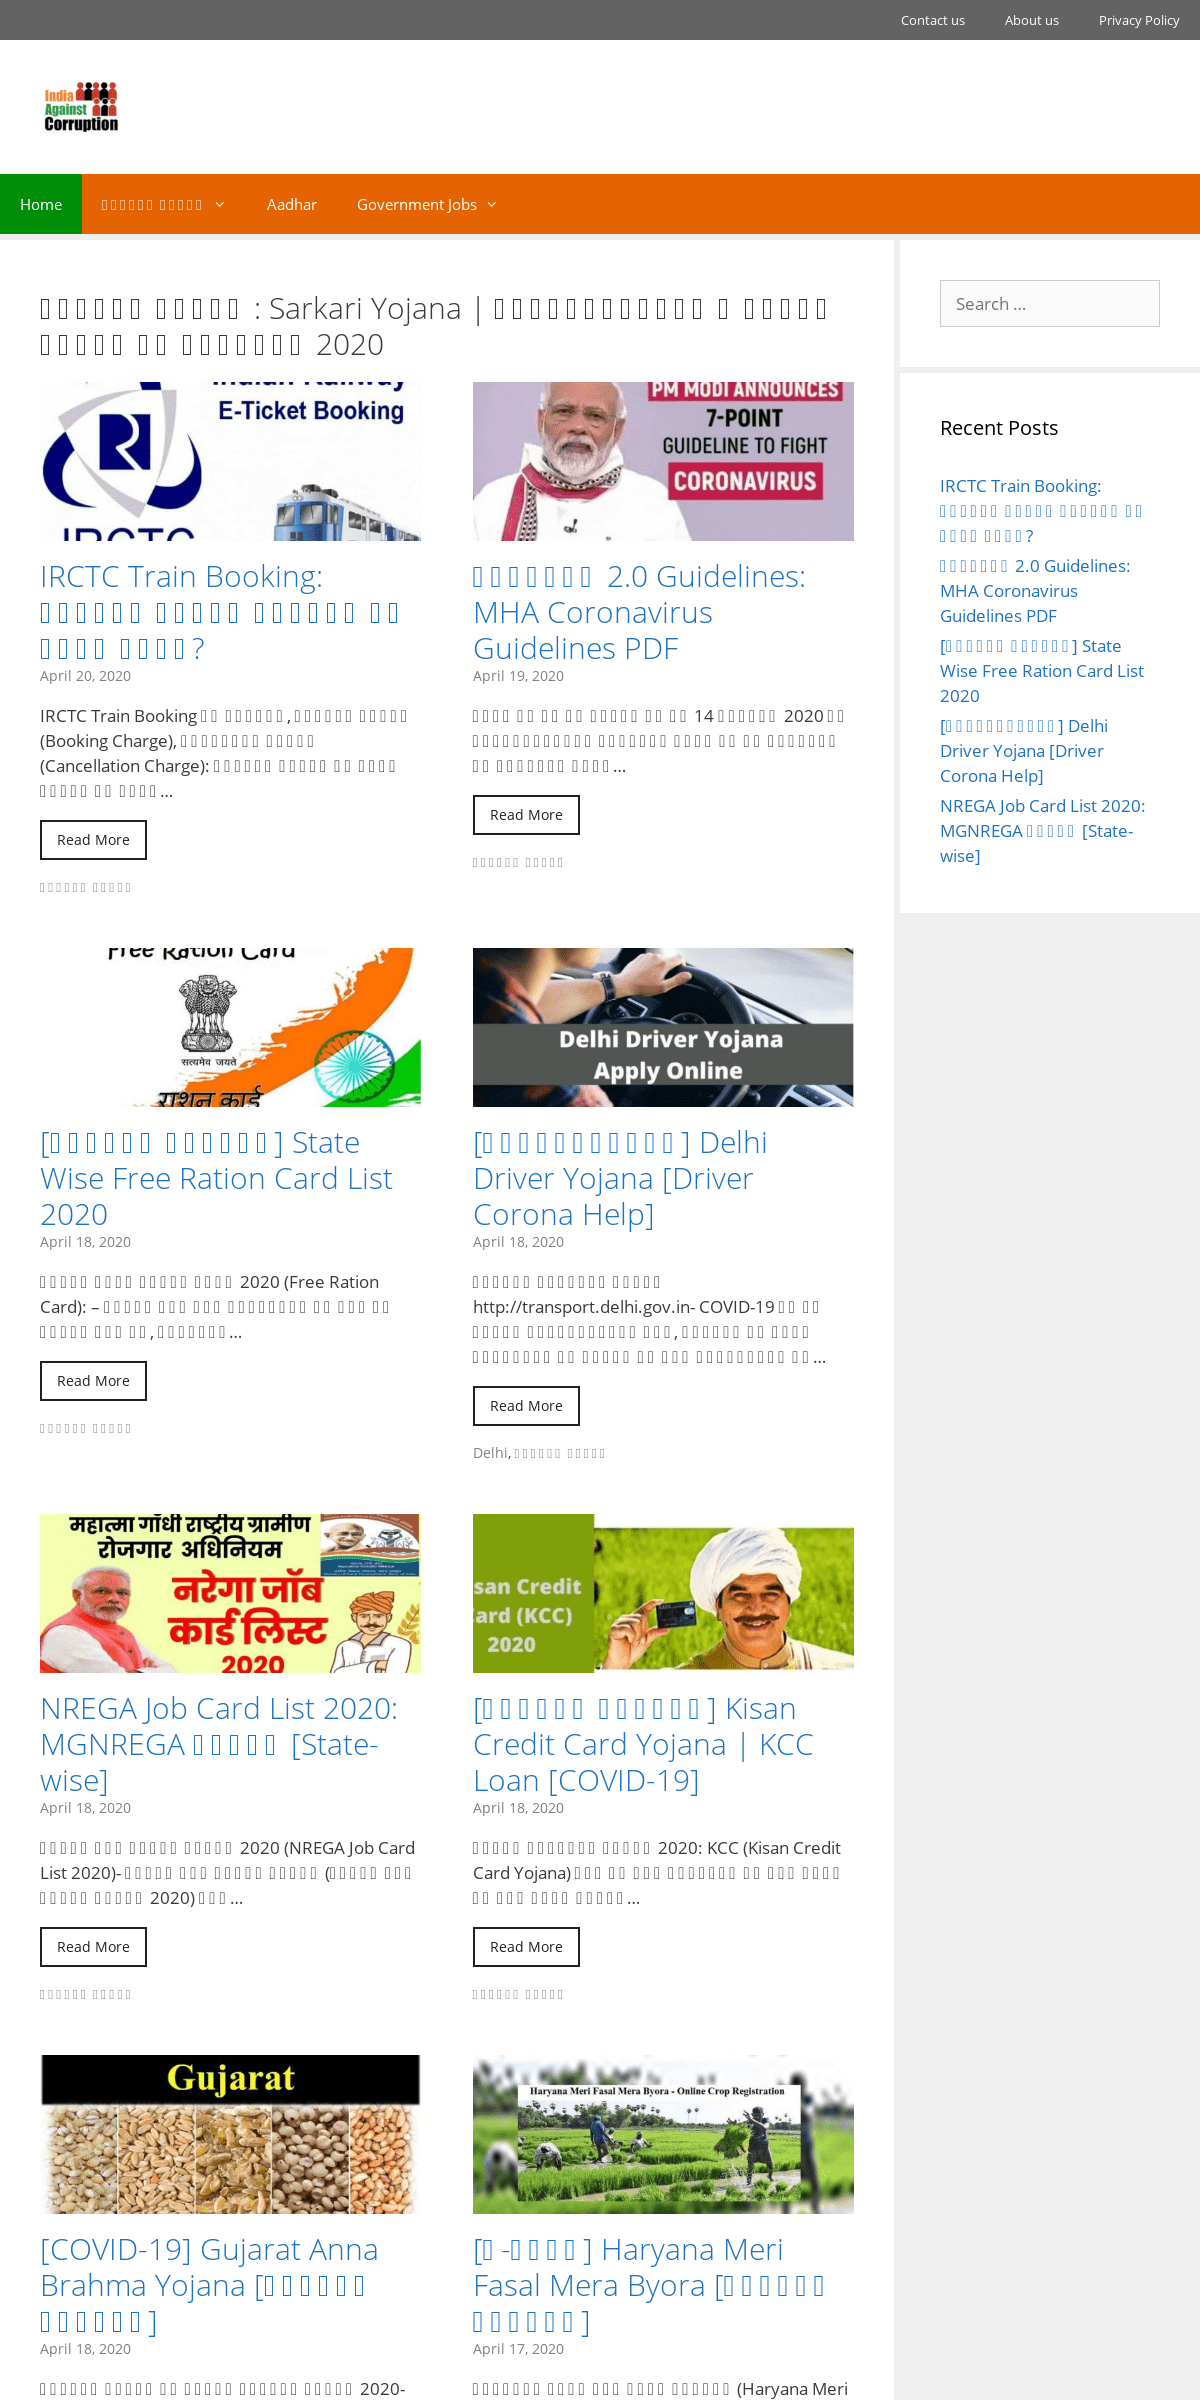 A complete backup of indiaagainstcorruption.org